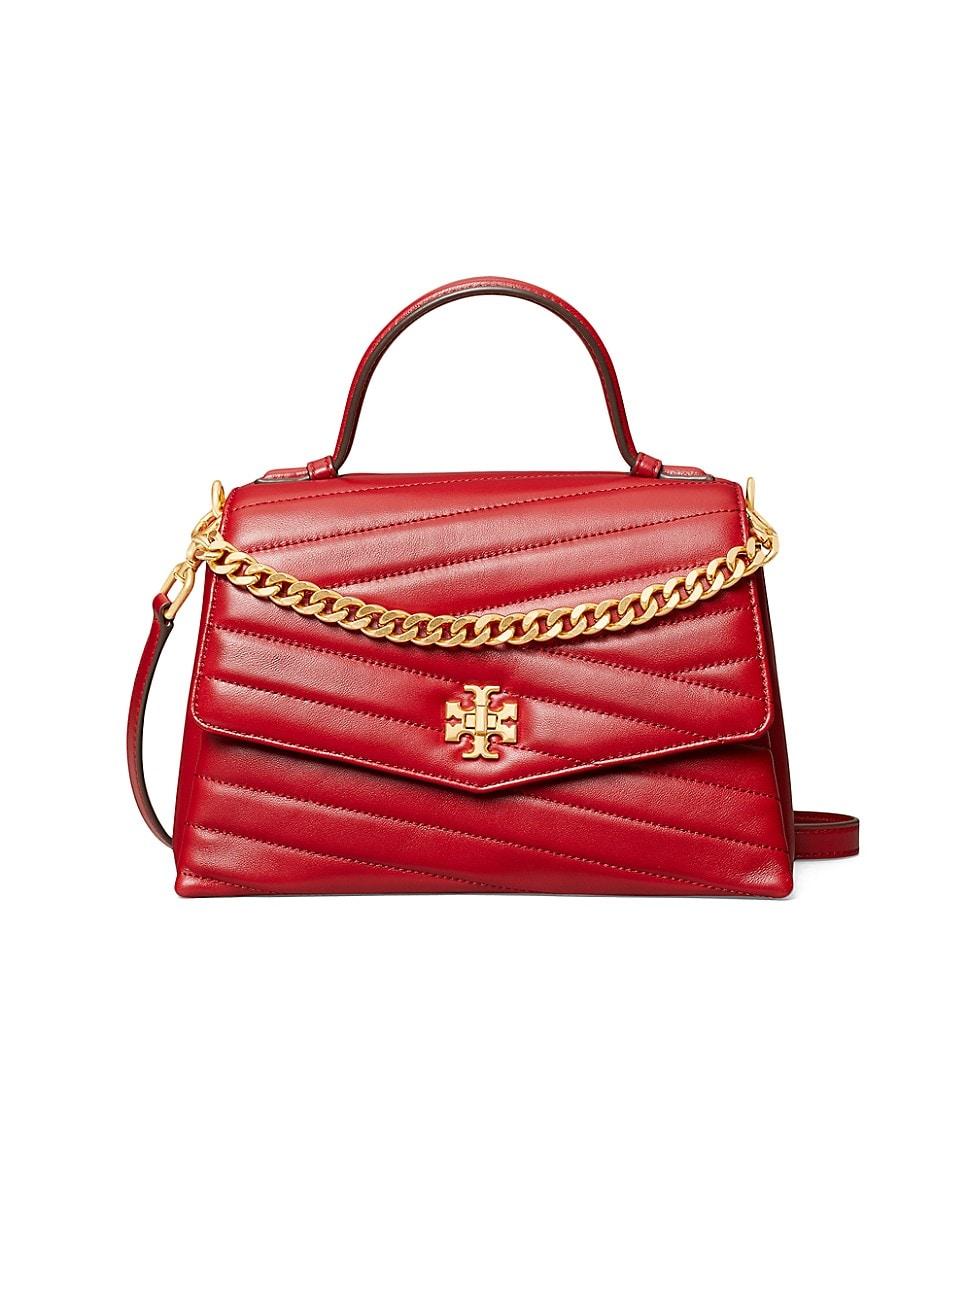 Tory Burch Small Kira Chevron Leather Top Handle Bag in Red - Lyst